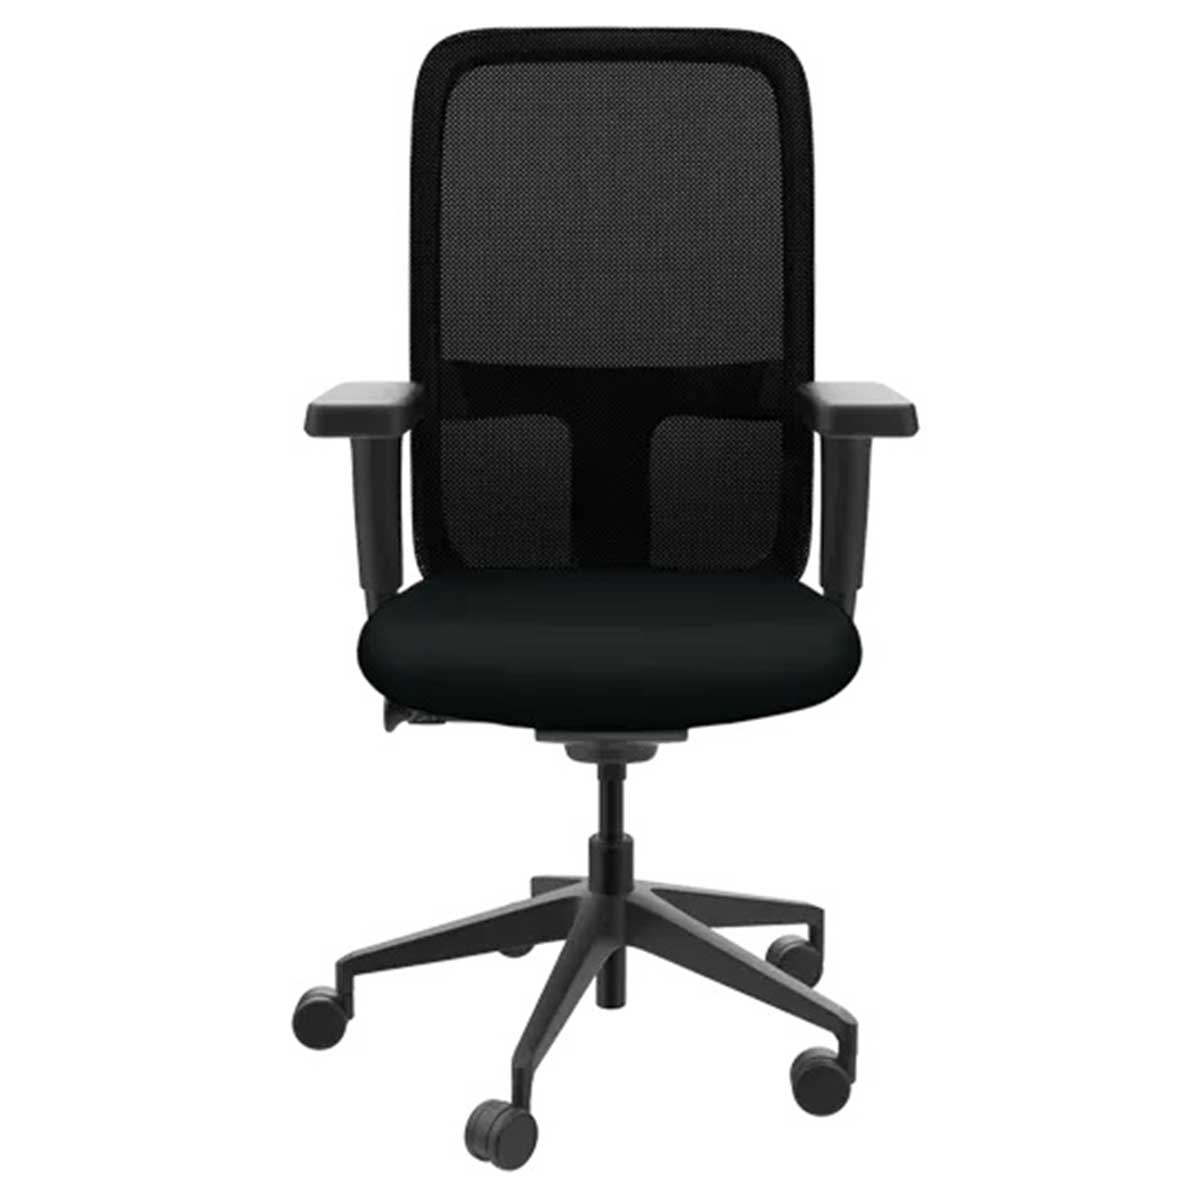 Revolving Chair Manufacturers, Suppliers in Mayur Vihar Phase 3